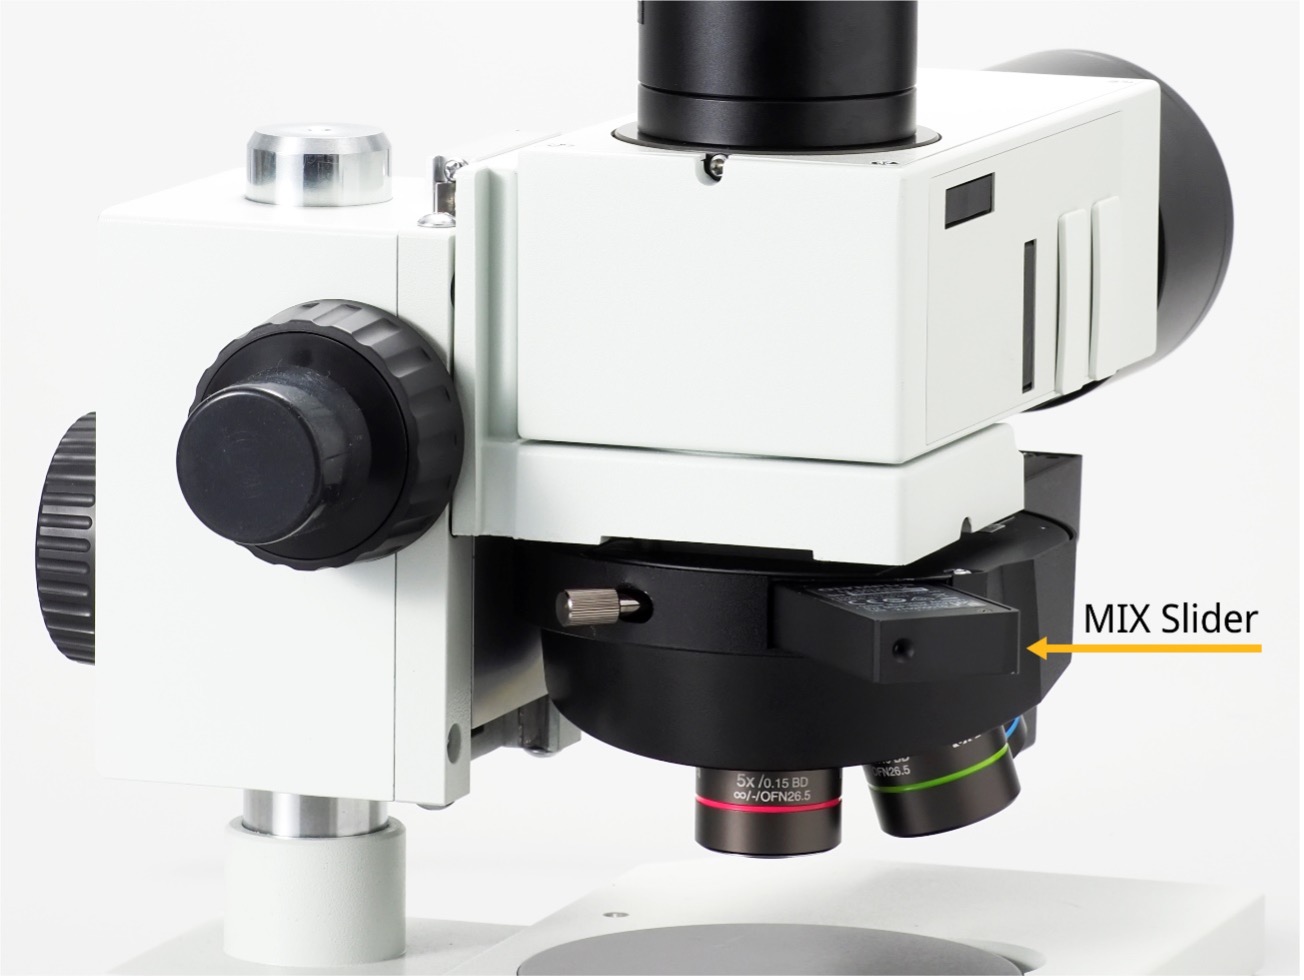 Compact microscope equipped with MIX observation